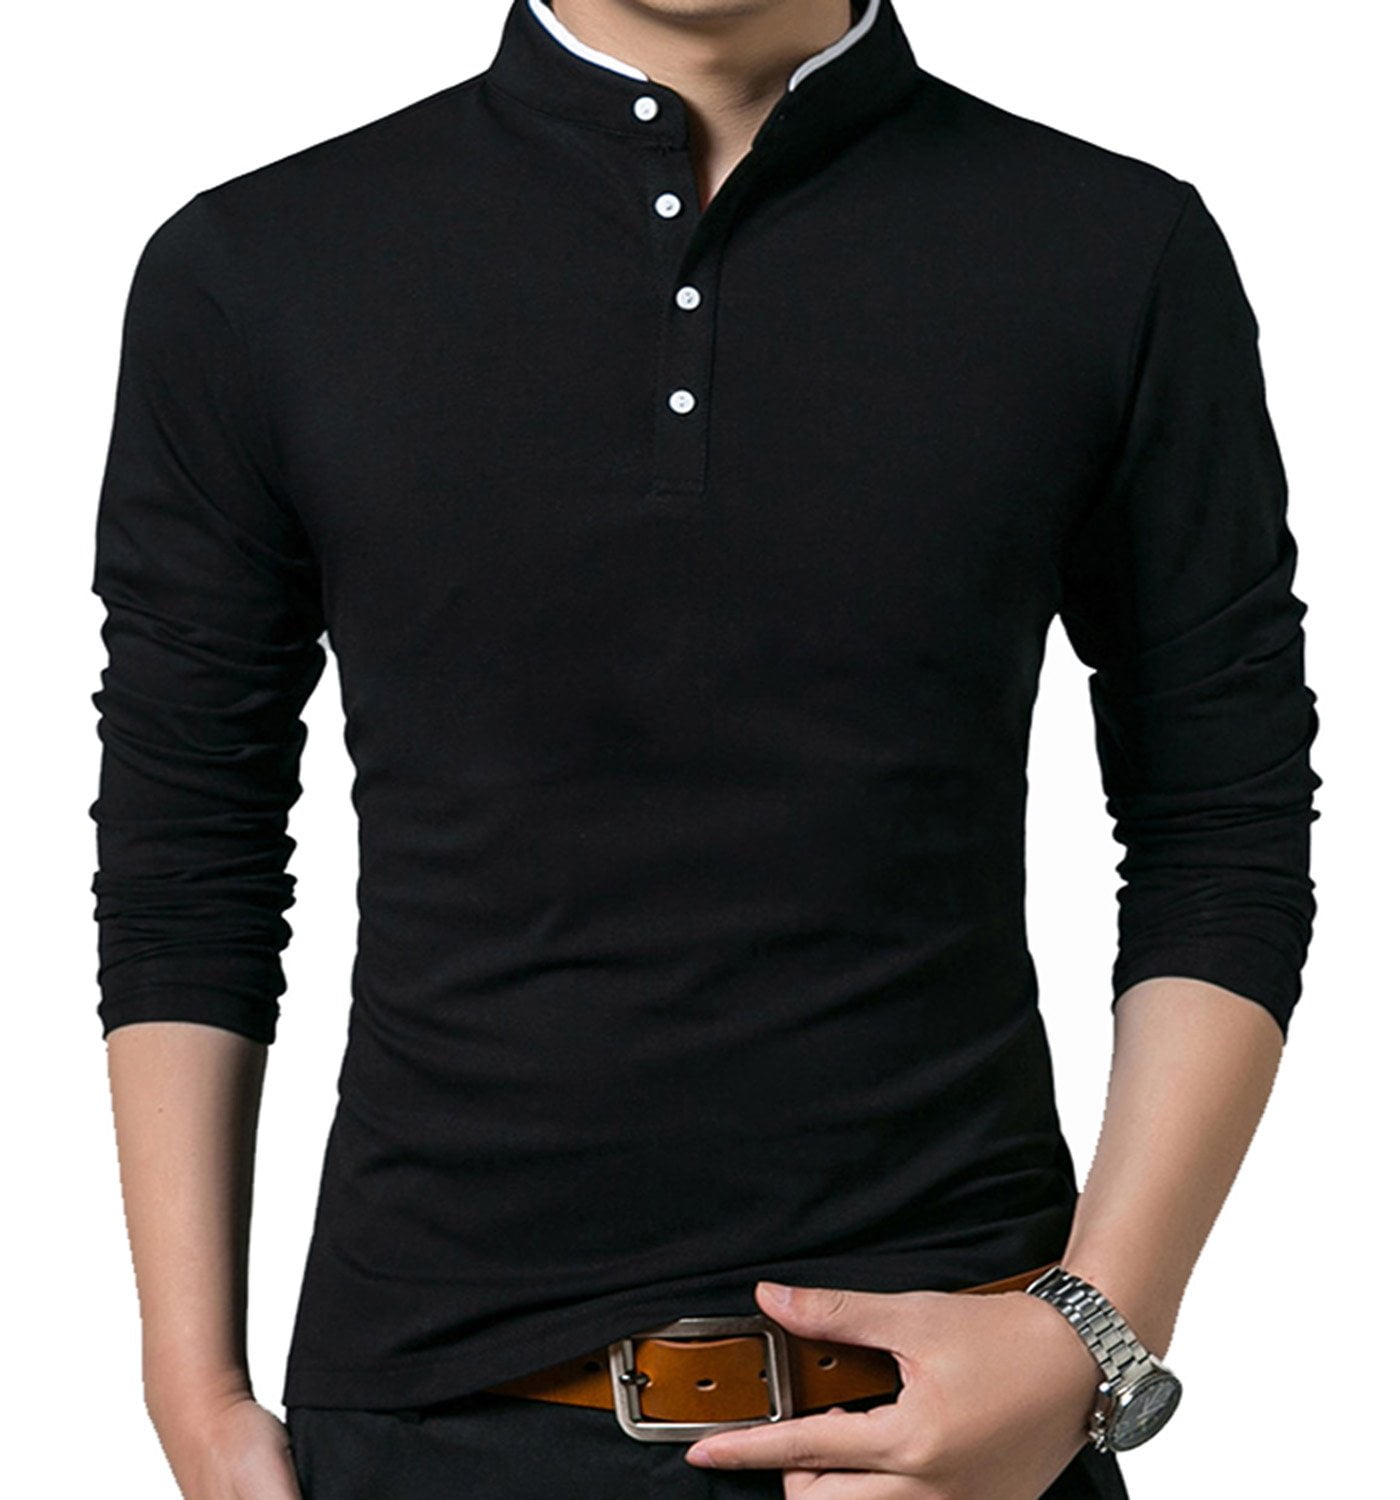 HAOMEILI Men’s Casual Slim Fit Shirts Pure Color Short&Long Sleeve Polo ...